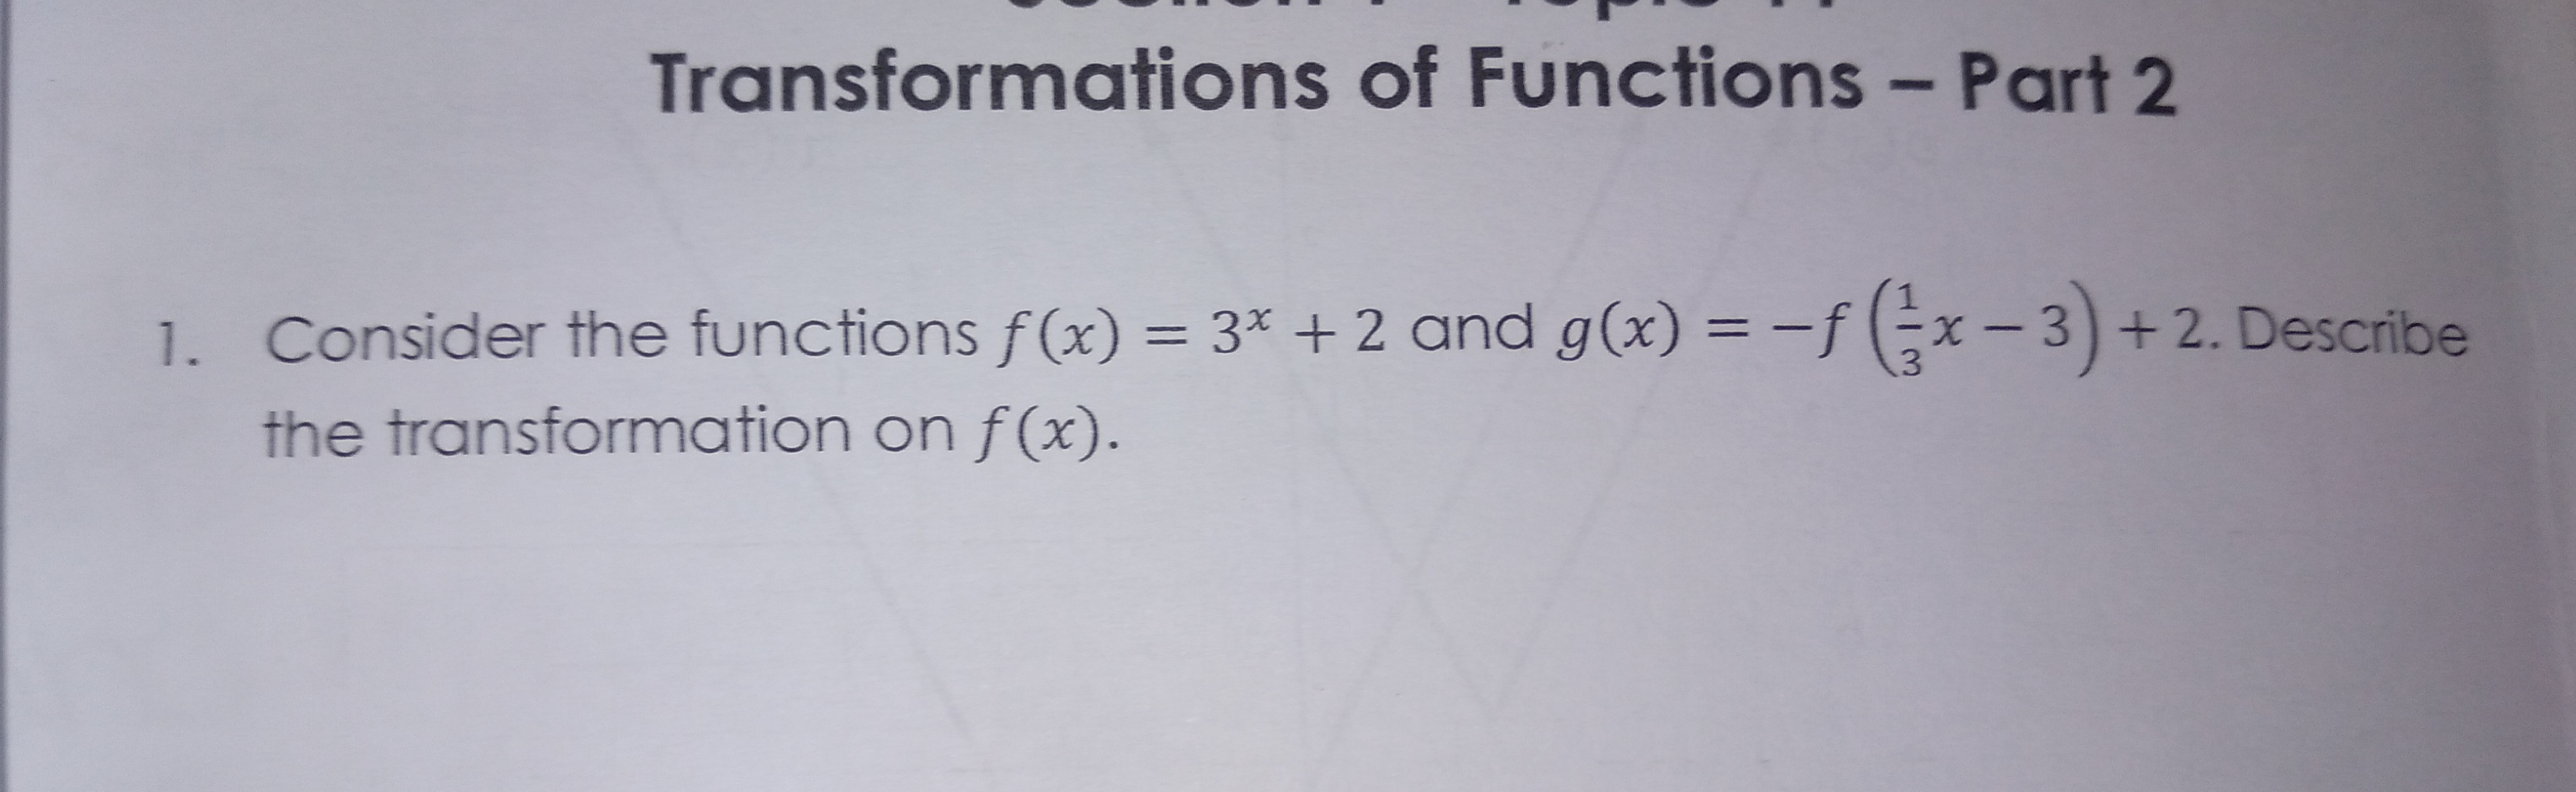 1. Consider the functions f(x) = 3* + 2 and g(x) = -f (÷x 3)+ 2. Describe
%3D
|
.3
the transformation on f (x).
